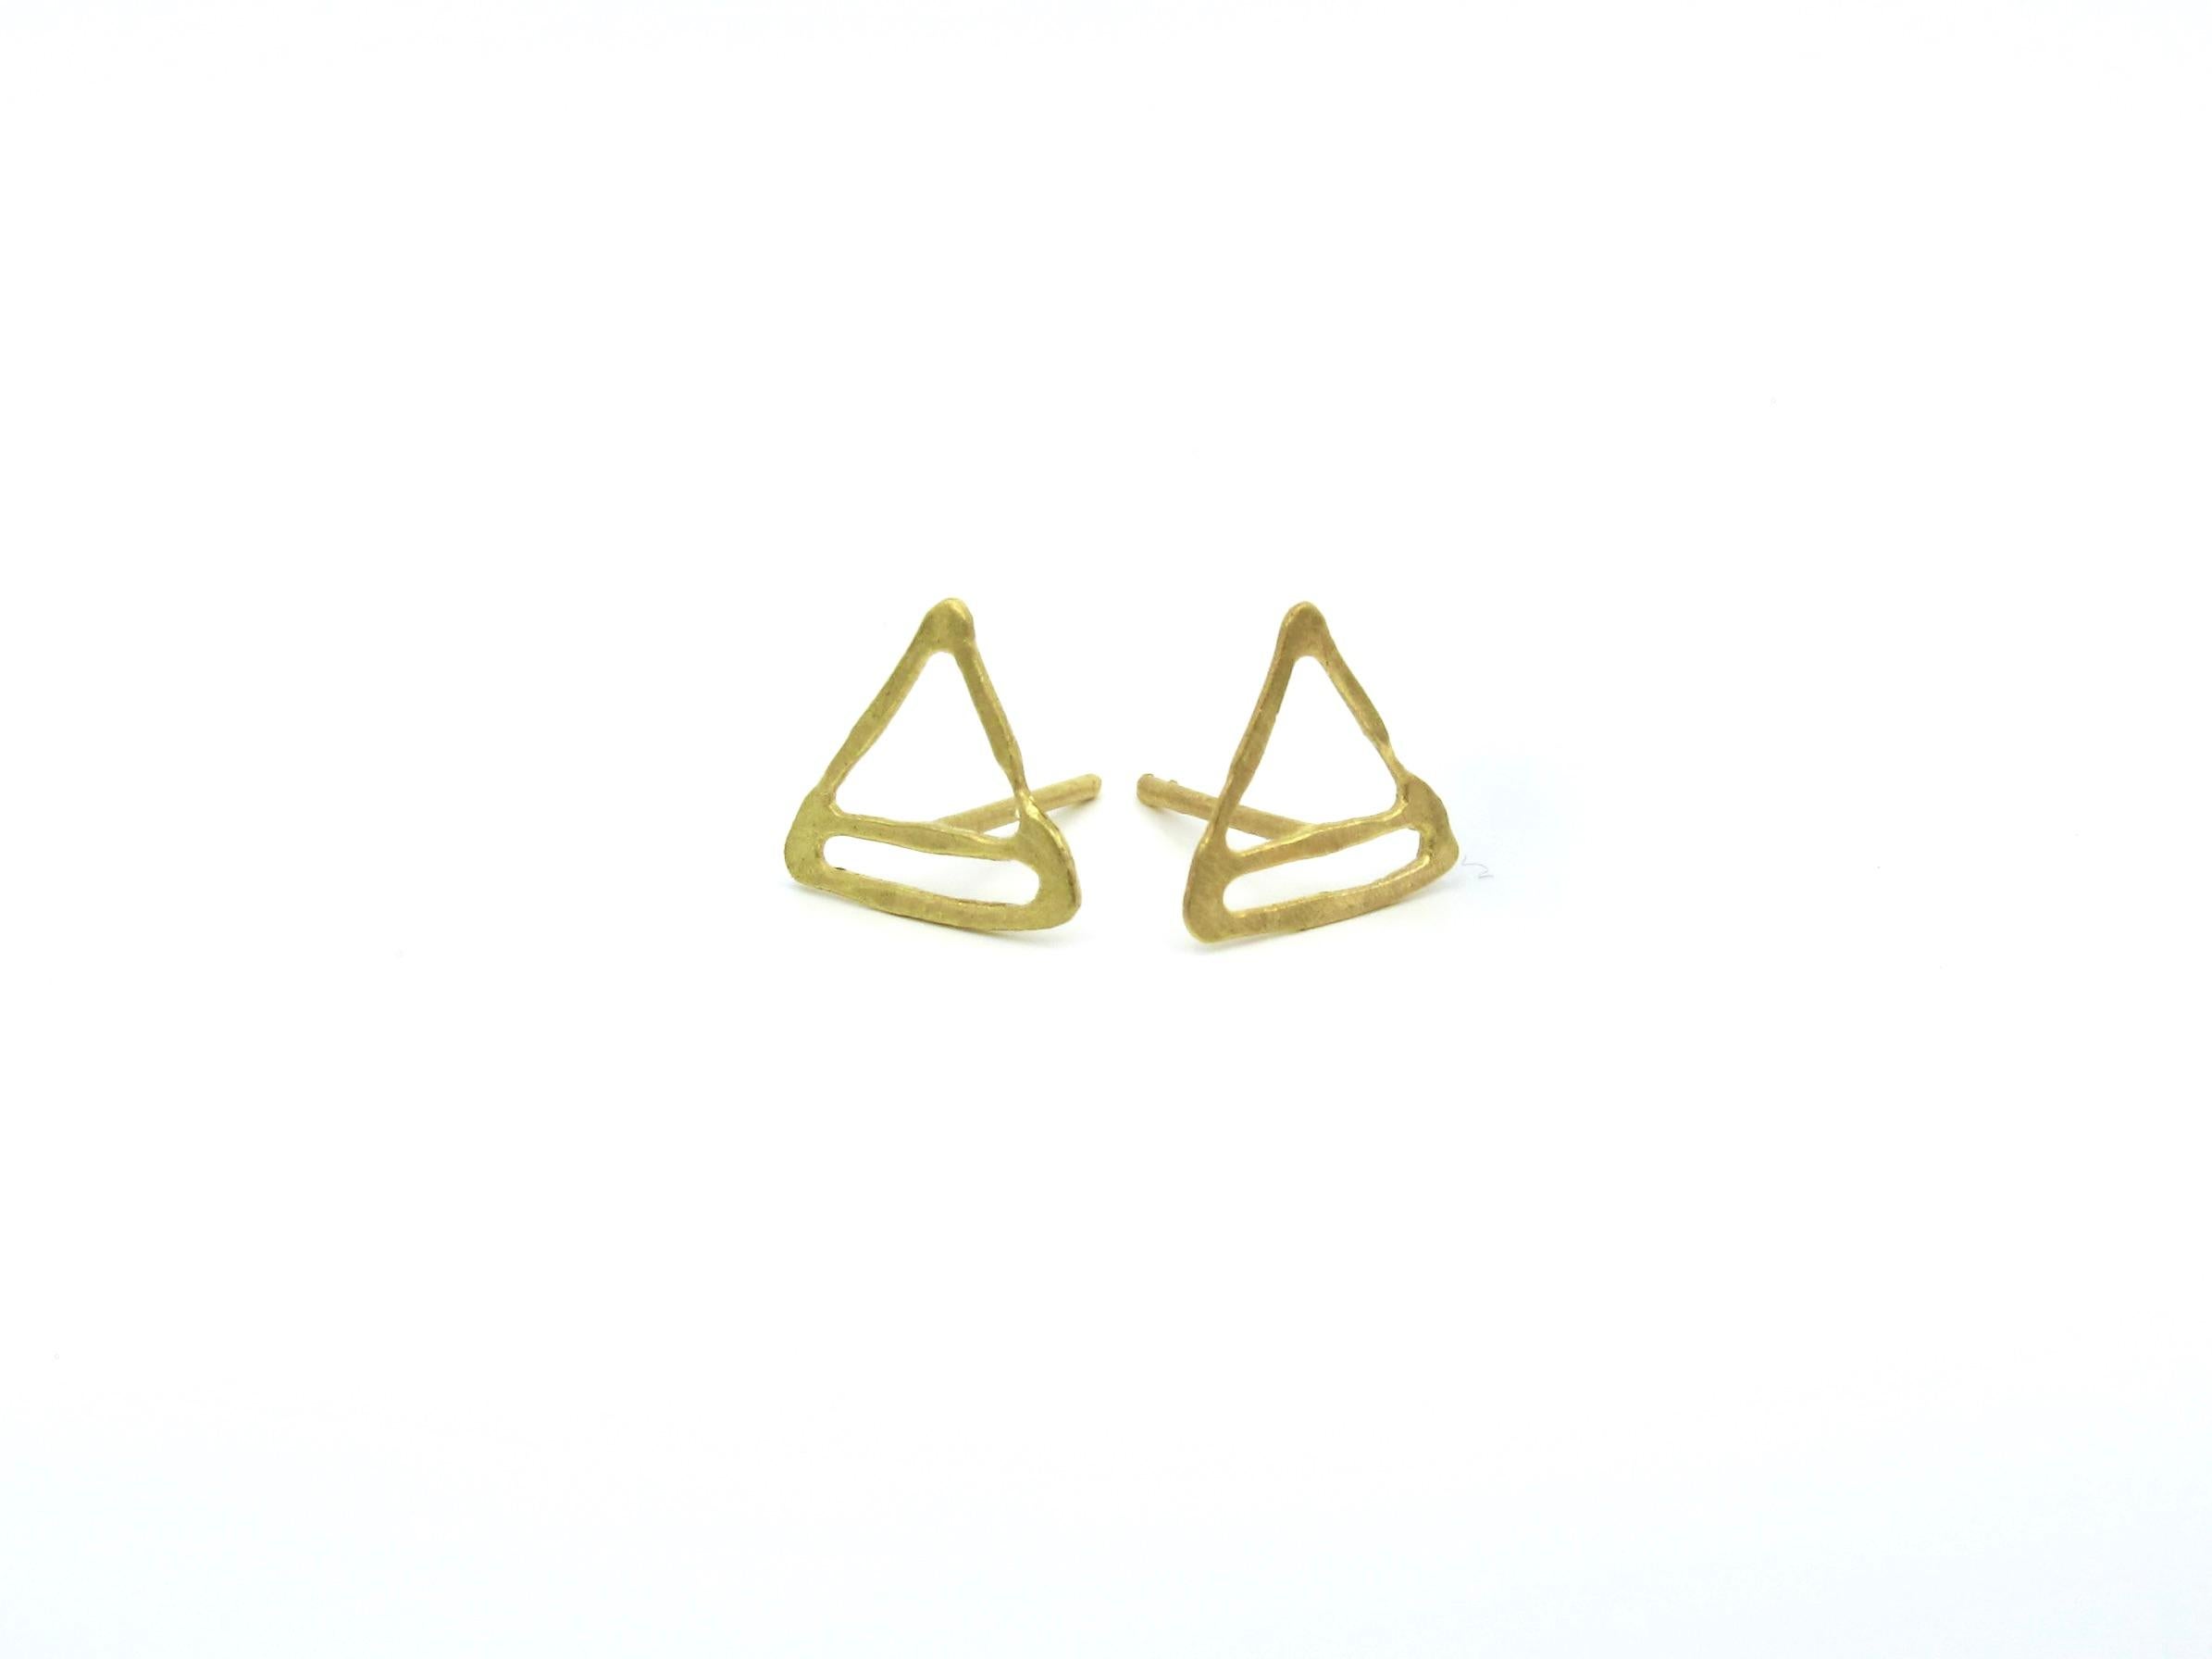 The RIMA JEWELS ALCHEMY STUD COLLECTION features a sampling of some of the symbols that populated alchemical texts from the medieval period to the renaissance. The symbols represent elements, matter, instruments, and processes among other